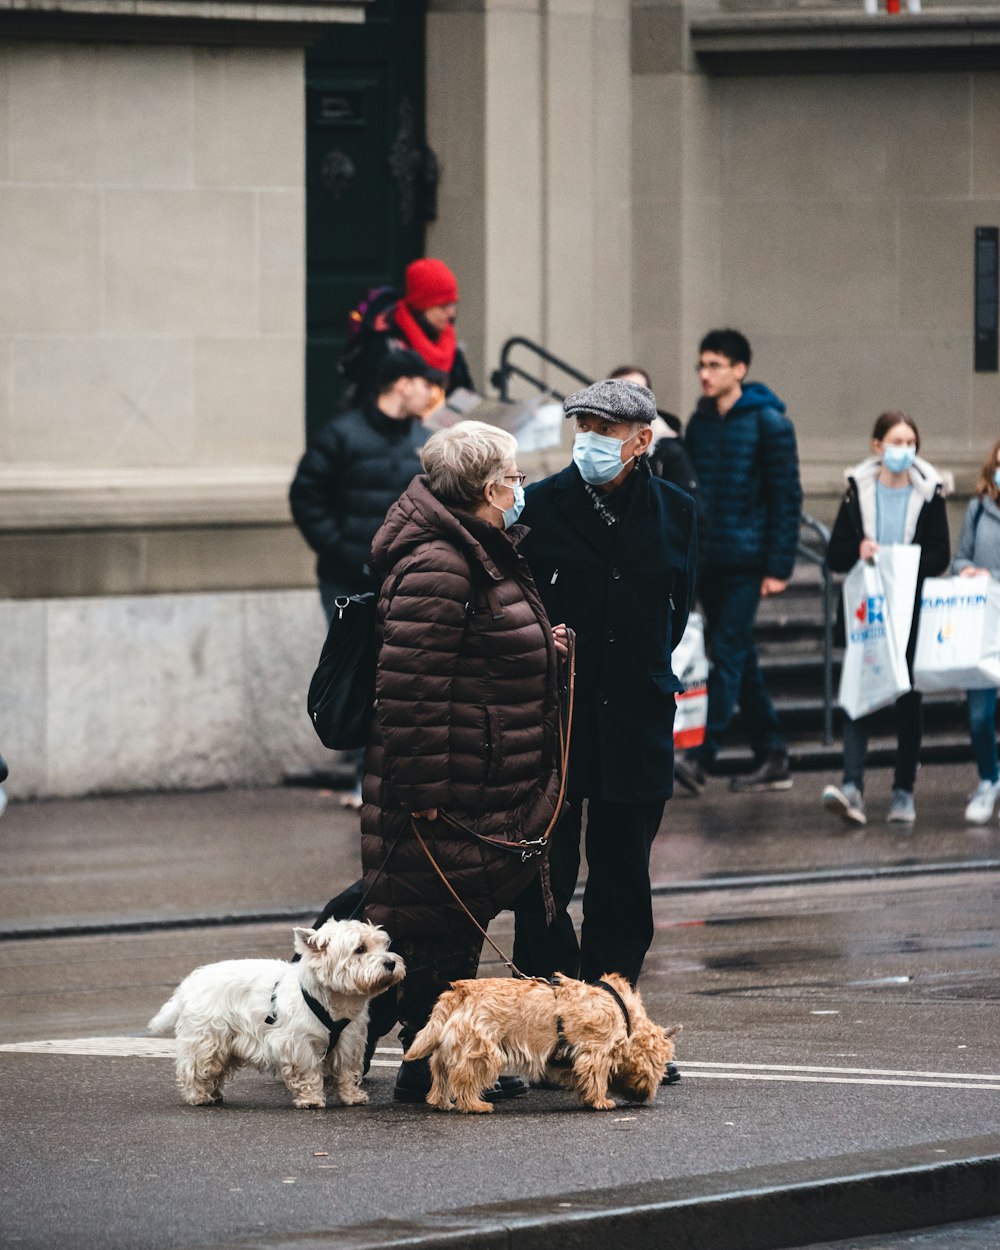 a group of people walking their dogs on a city street